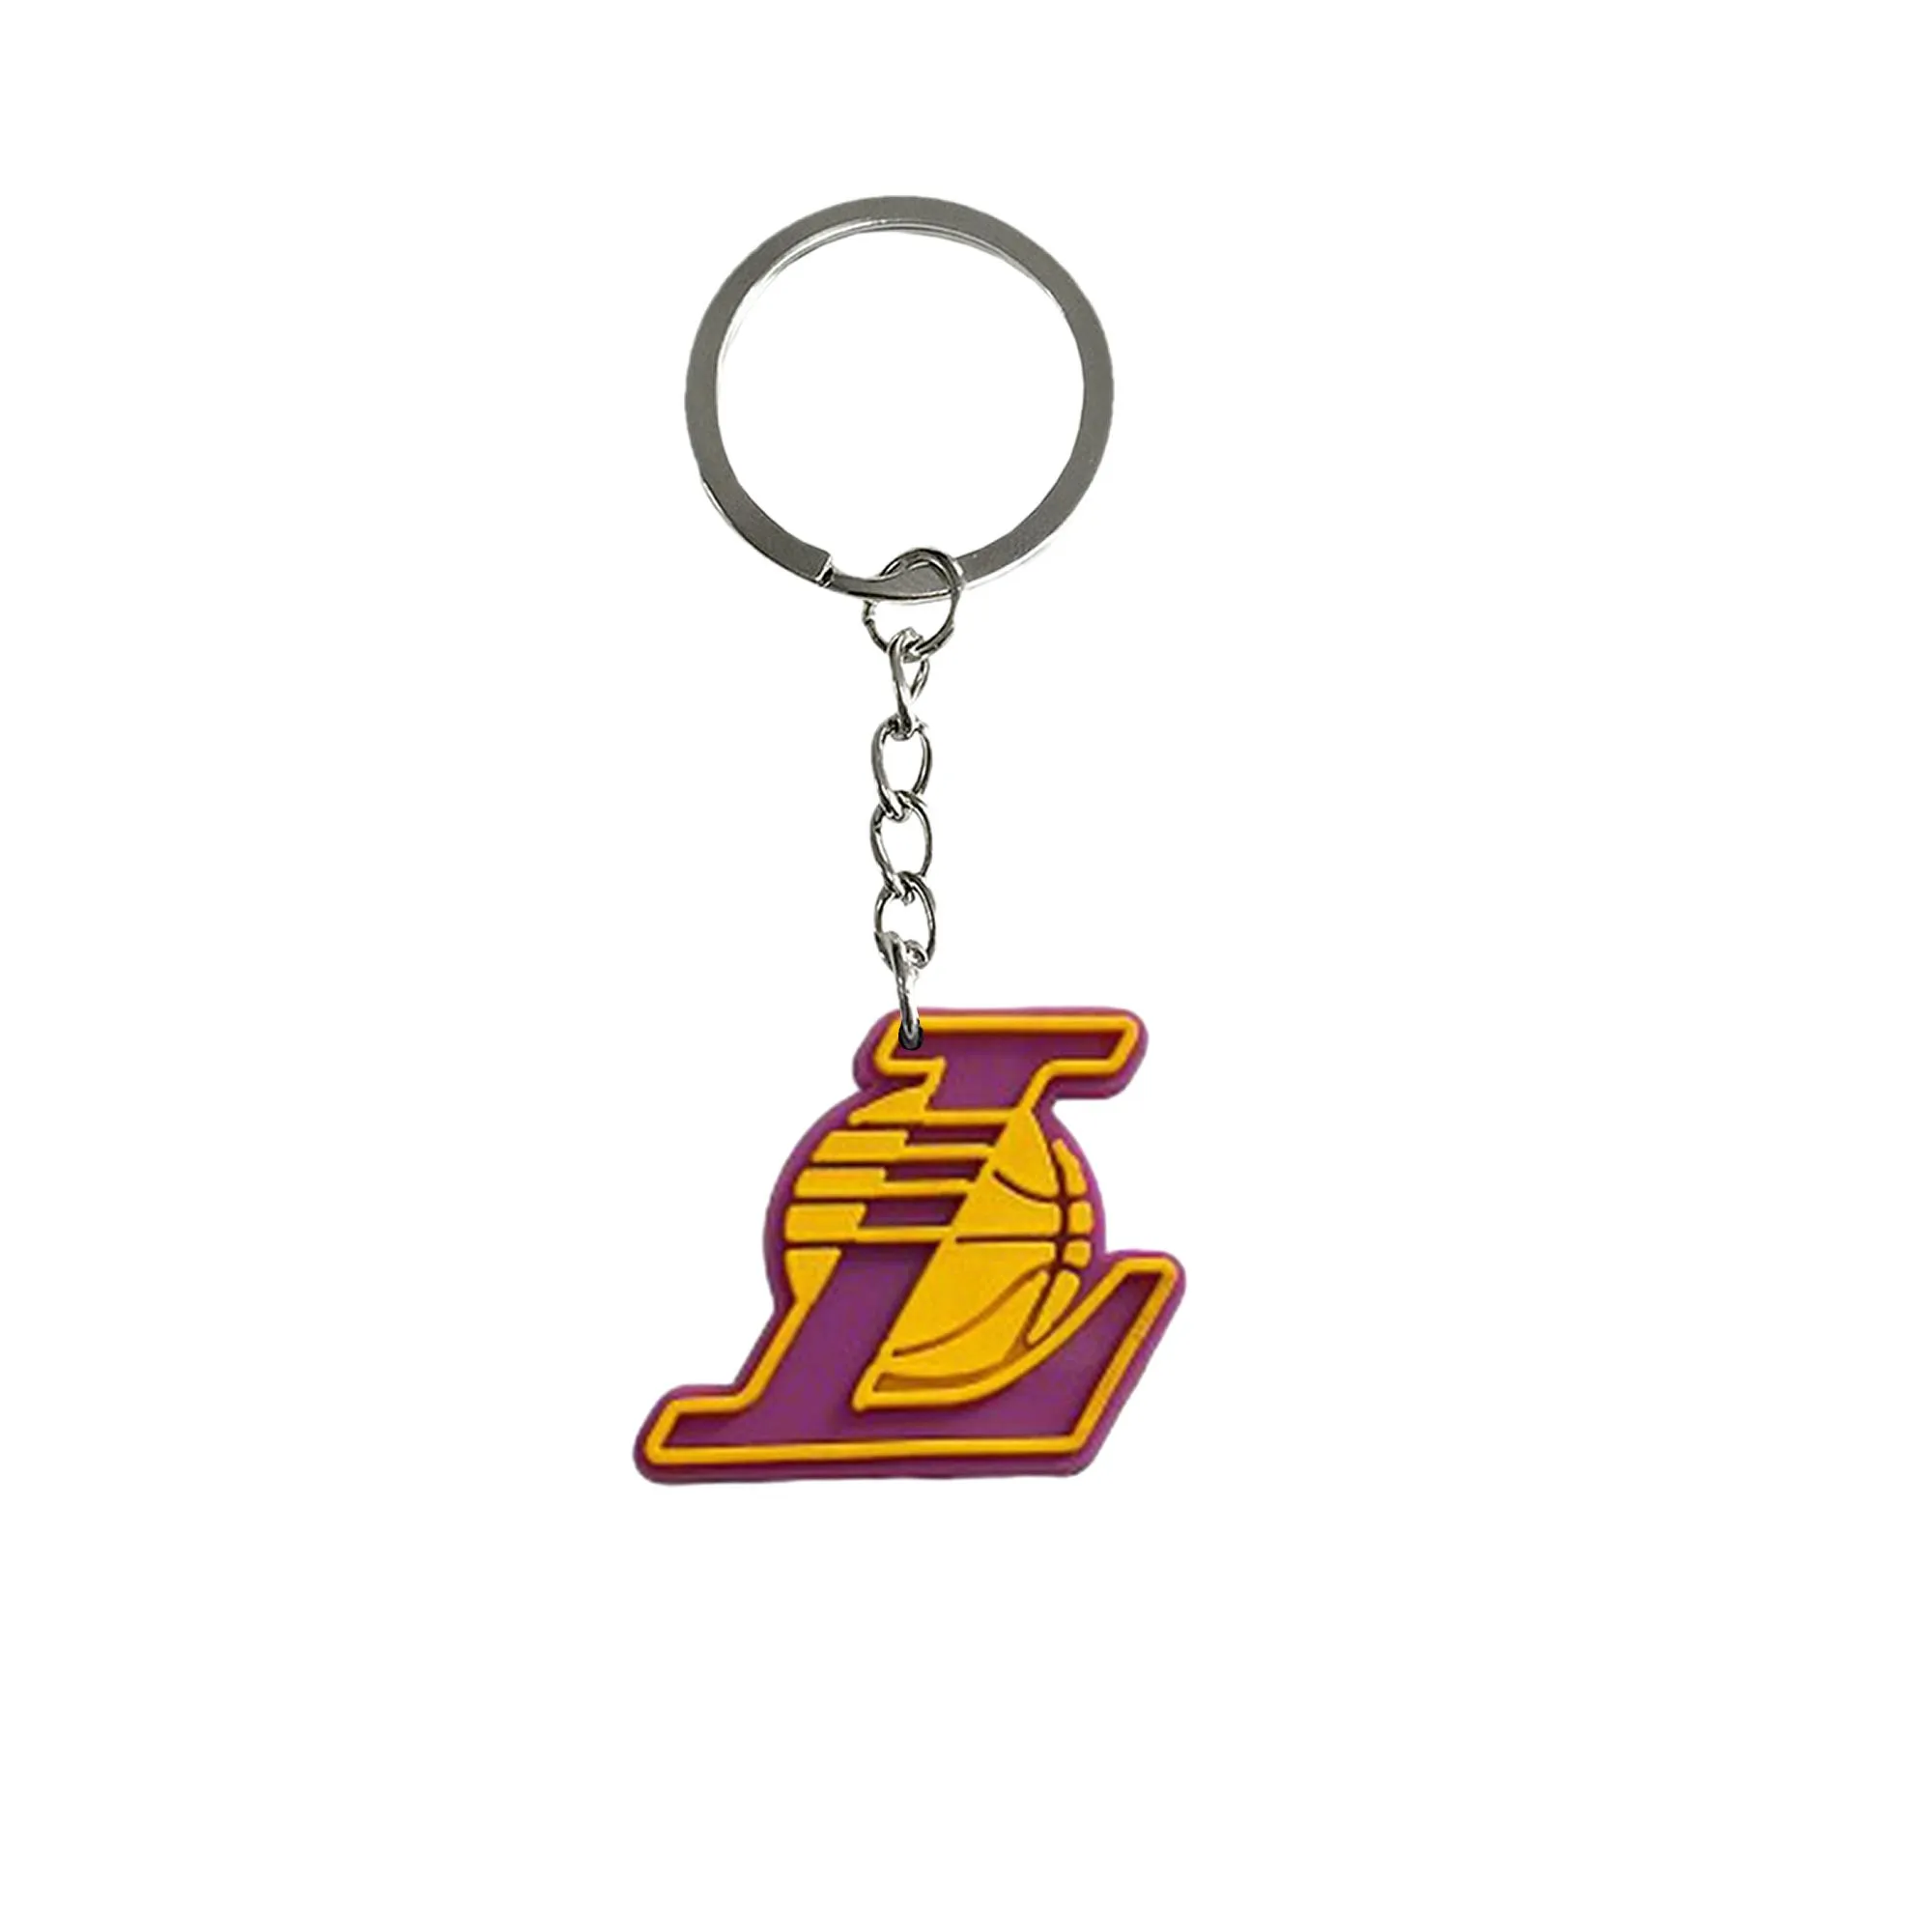 new basketball 64 keychain key chain accessories for backpack handbag and car gift valentines day keyring women pendants kids birthday party favors suitable schoolbag cool colorful anime character with wristlet ring boys shoulder bag pendant charm